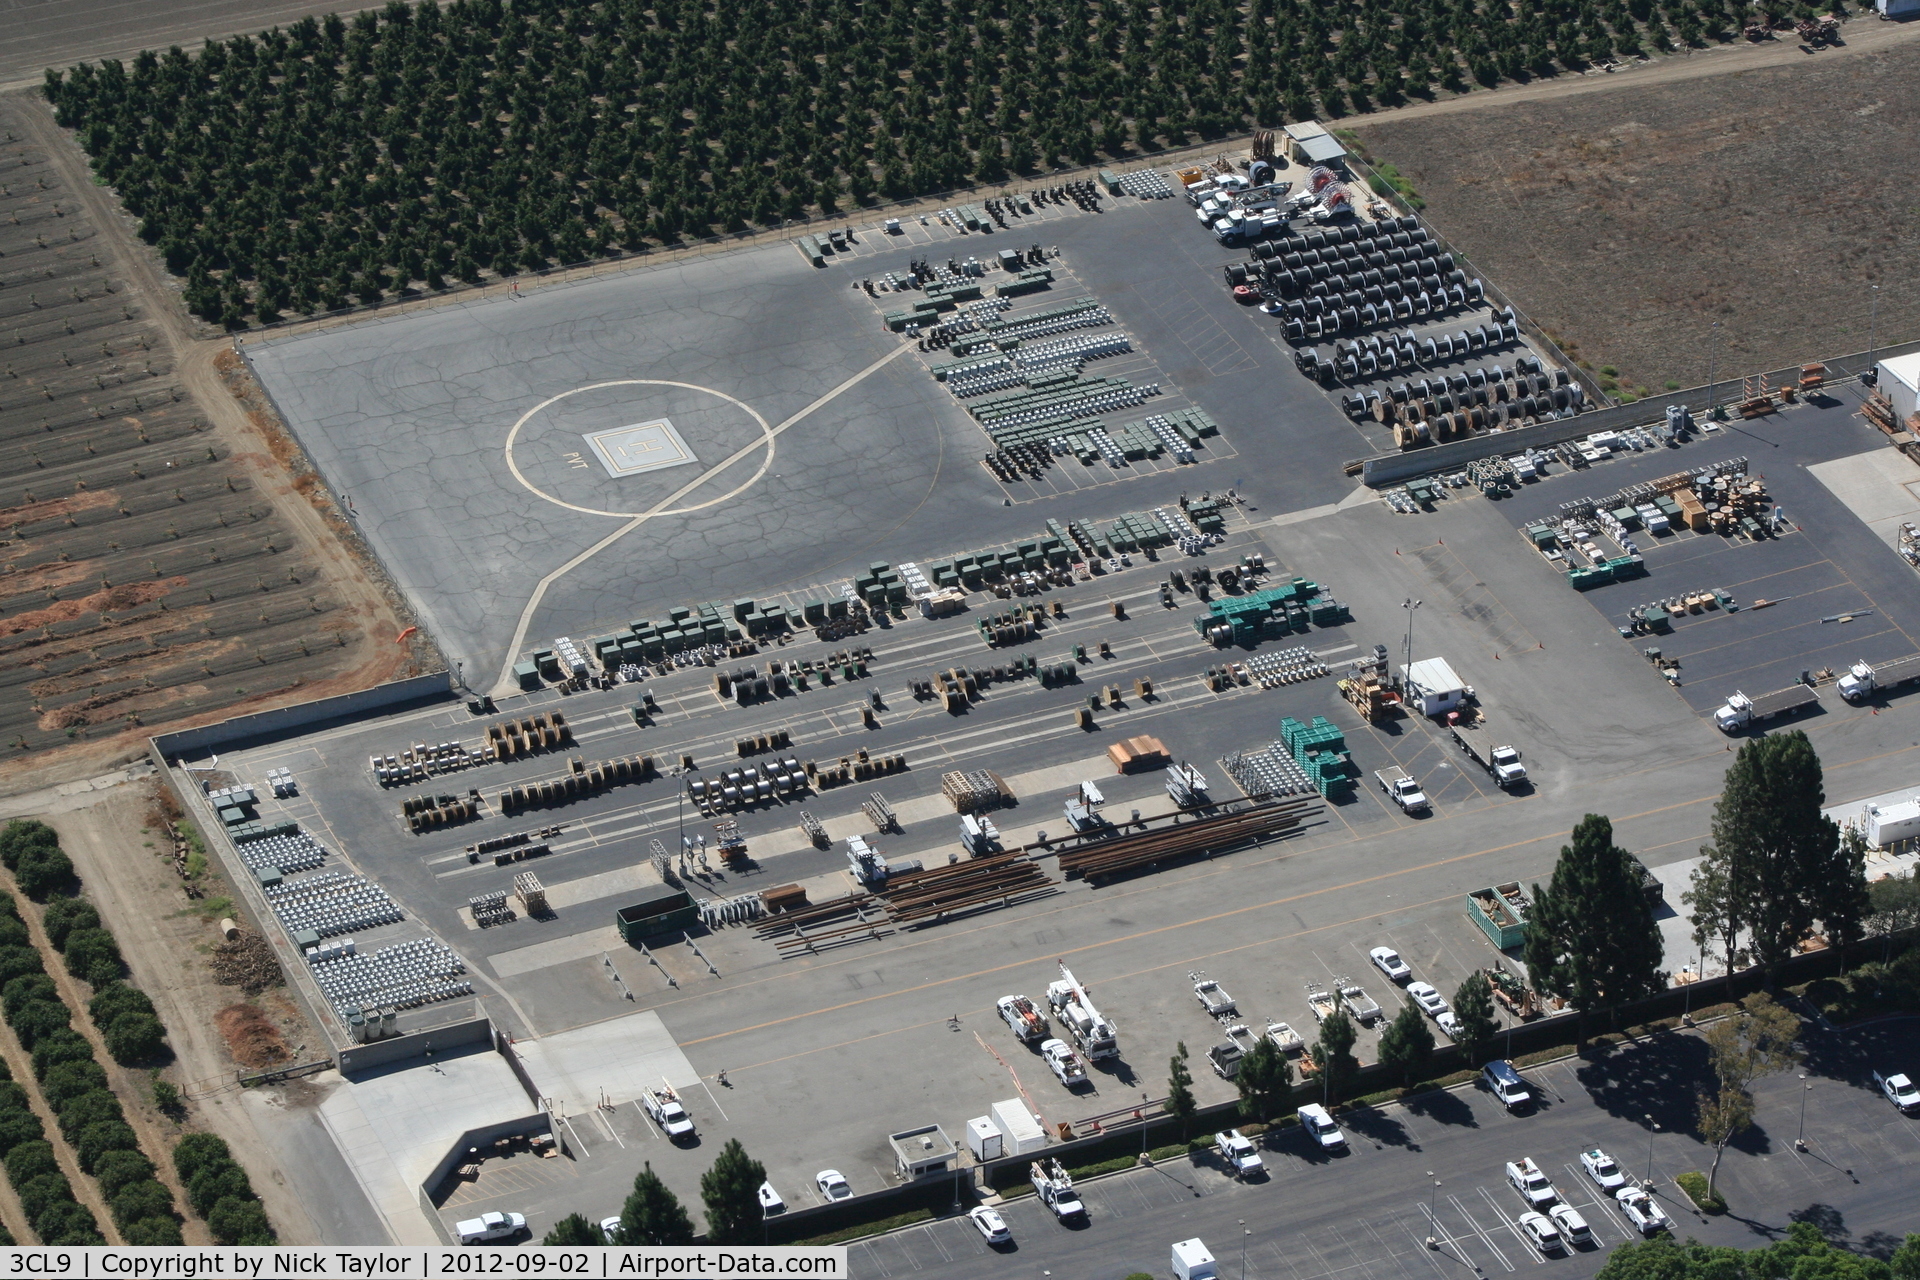 Sce Northern Division Heliport (3CL9) - Southern California Edison